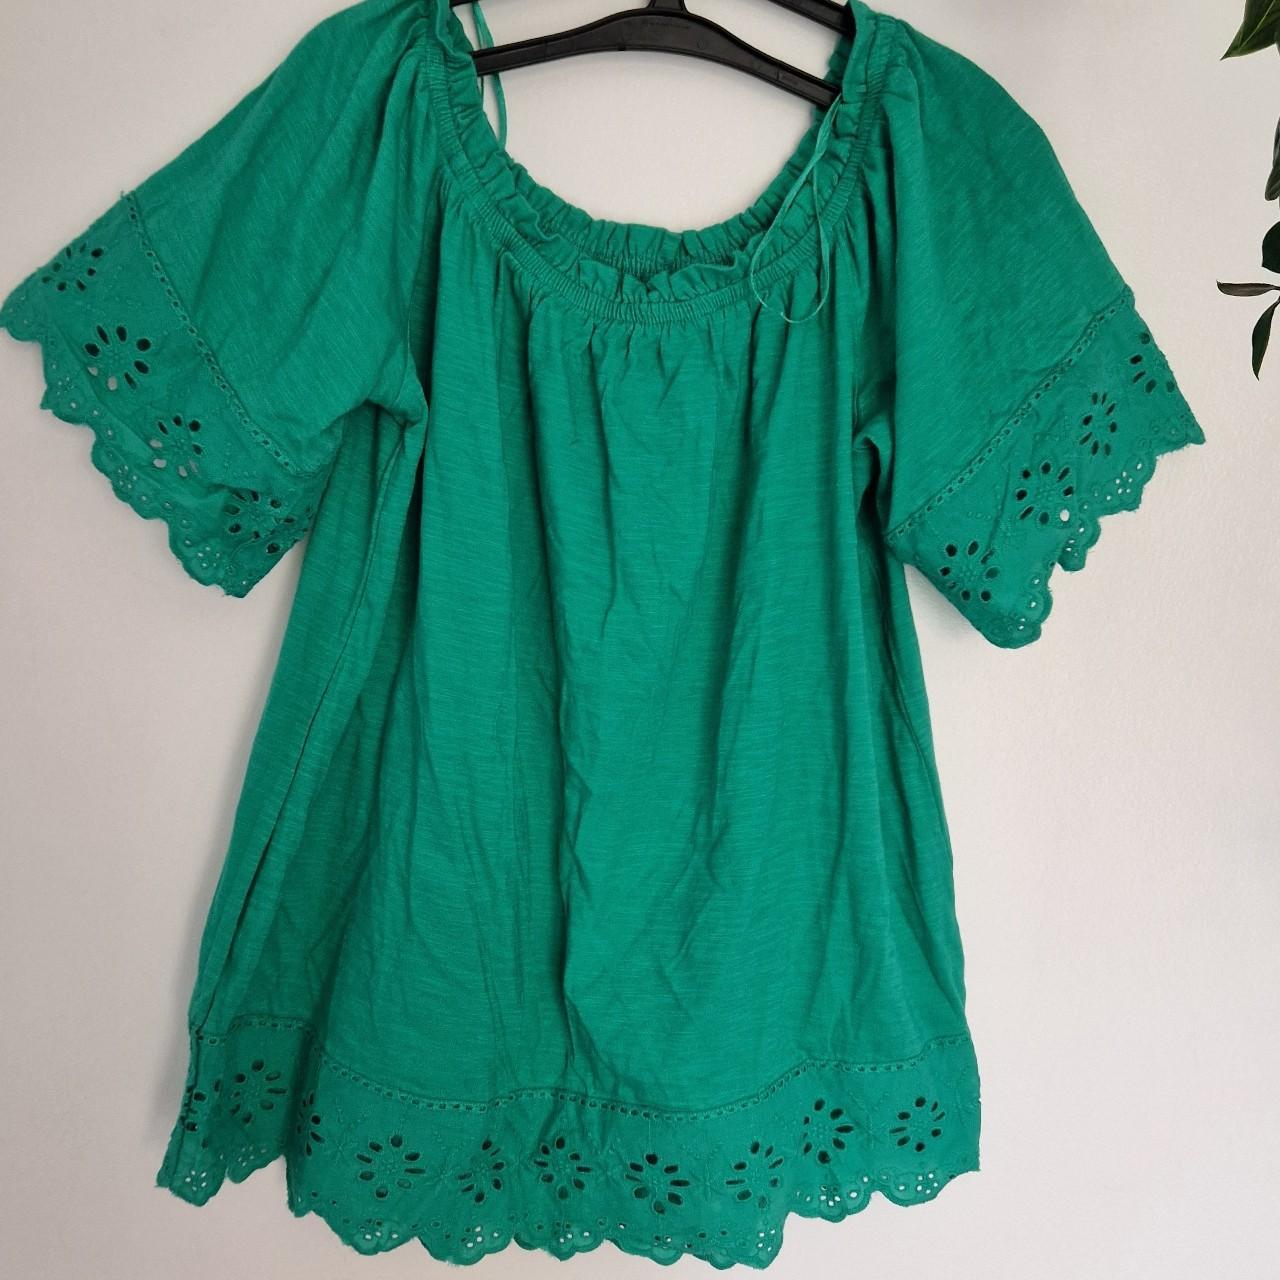 Nutmeg off the shoulder green top size 14 New with tags - Depop